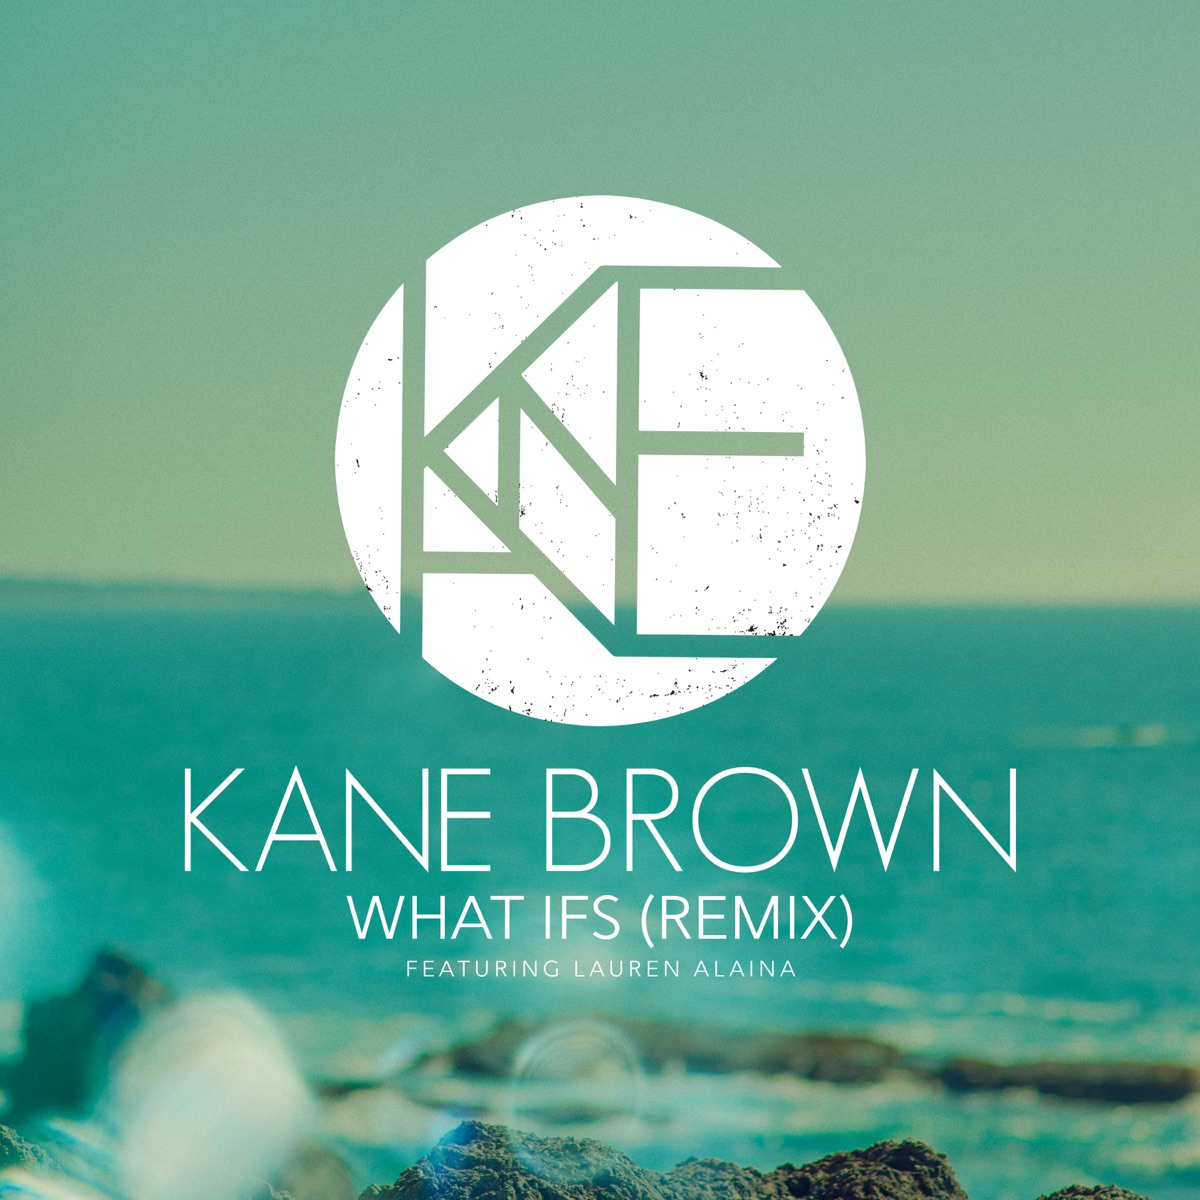 What Ifs Album Cover By Kane Brown